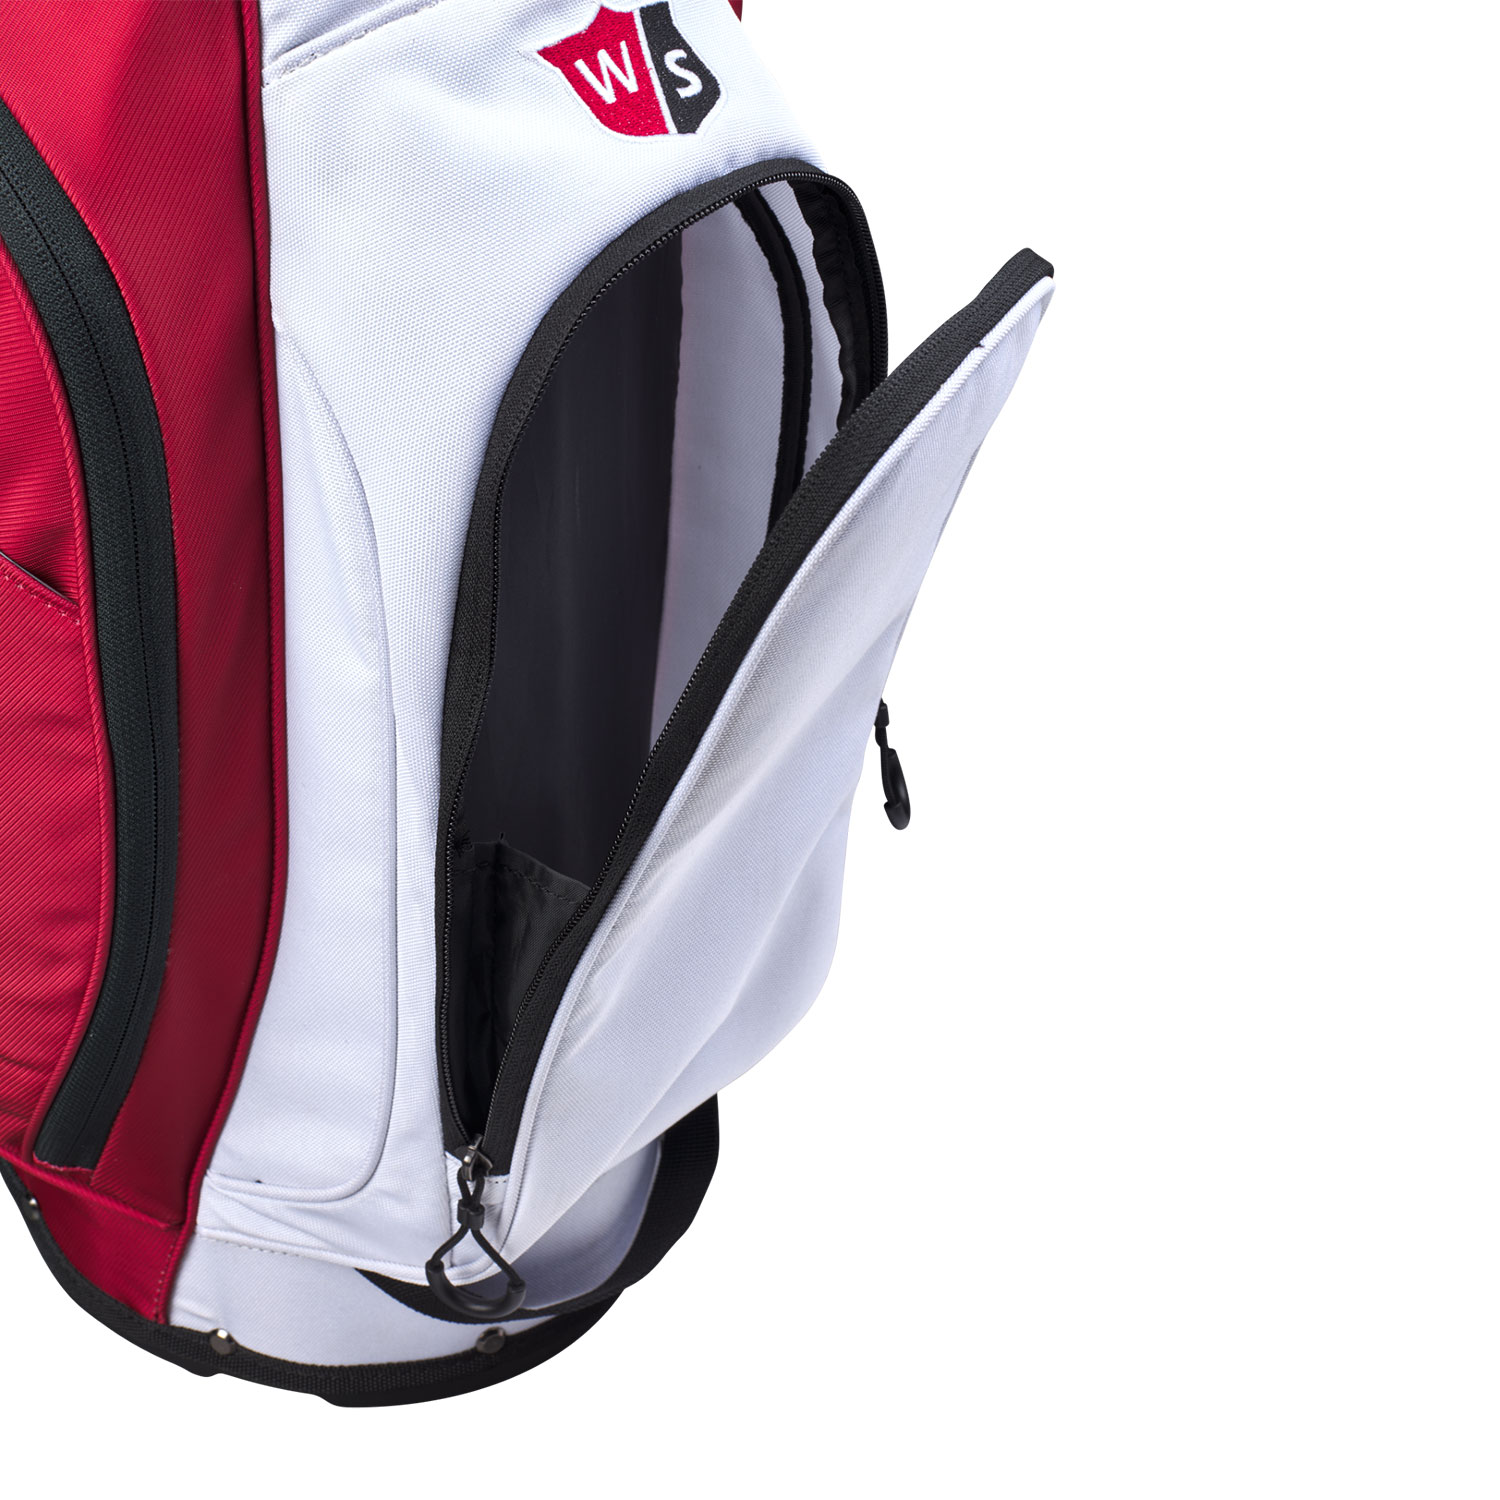 Wilson Ws Exo Lite Stand Bag - Stand bags